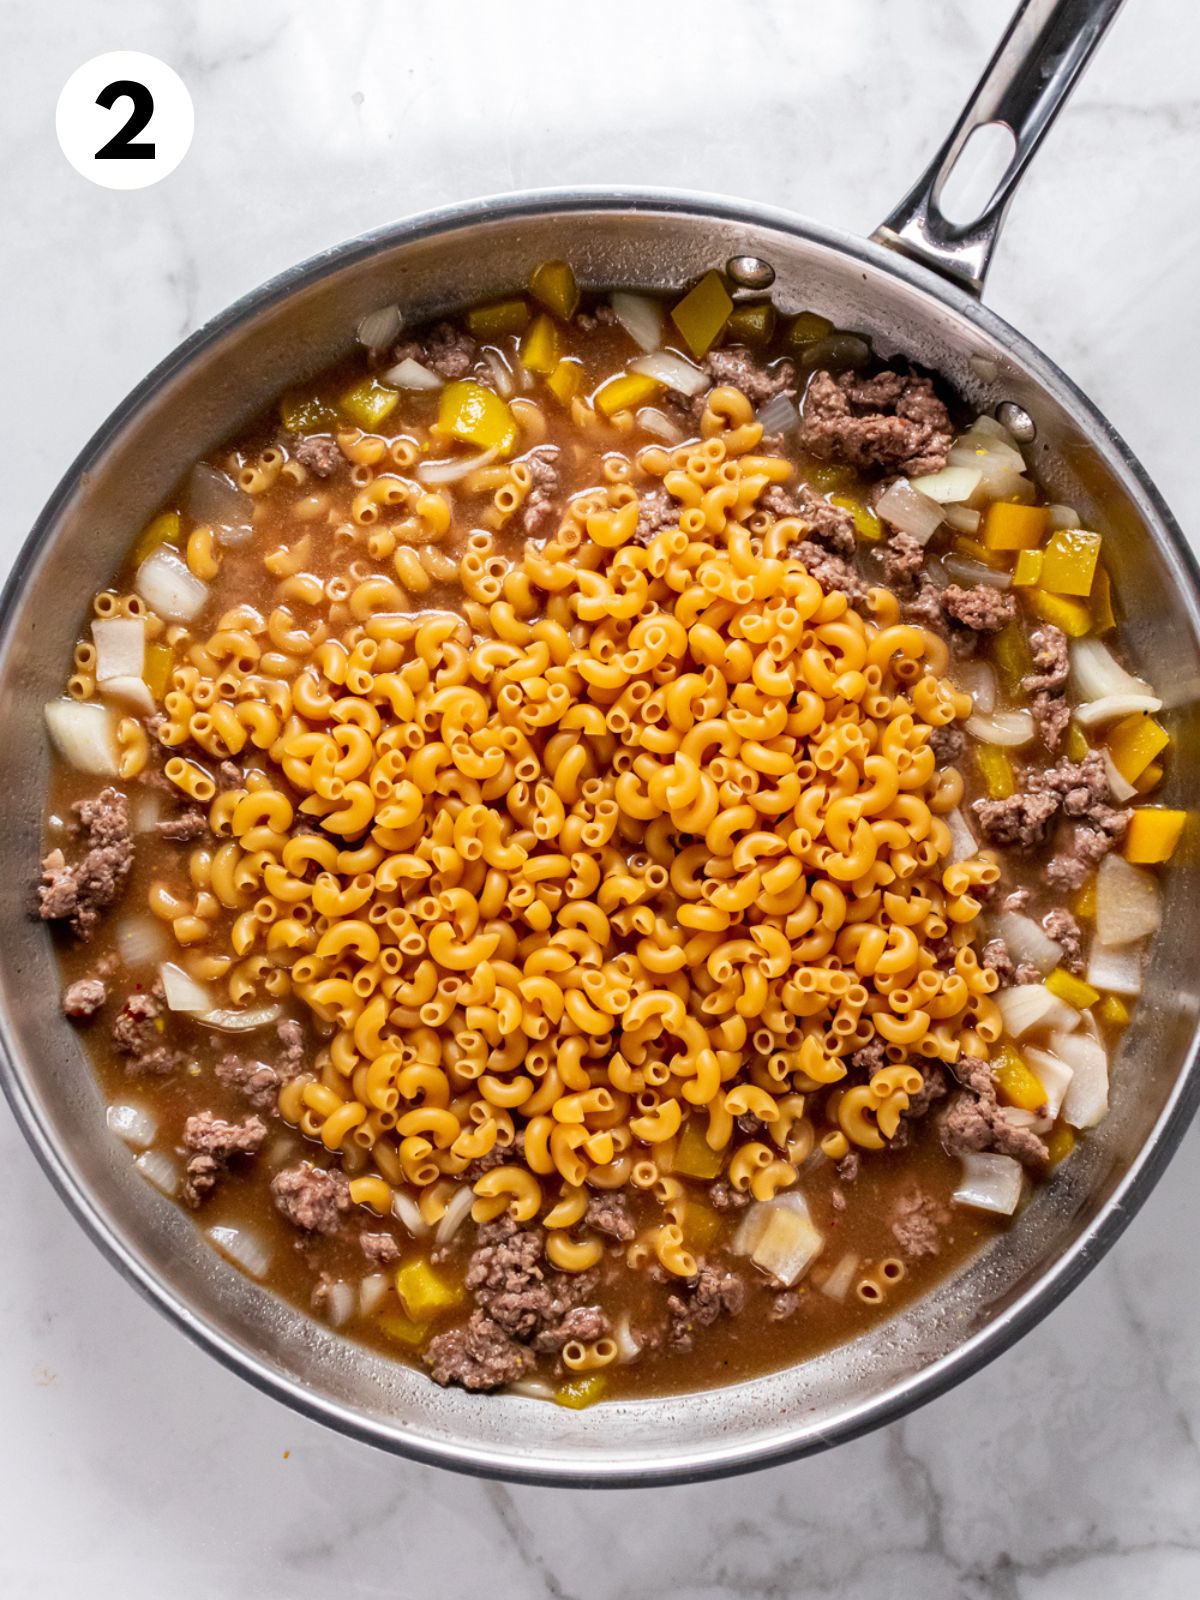 Broth and macaroni added to the skillet with the beef.